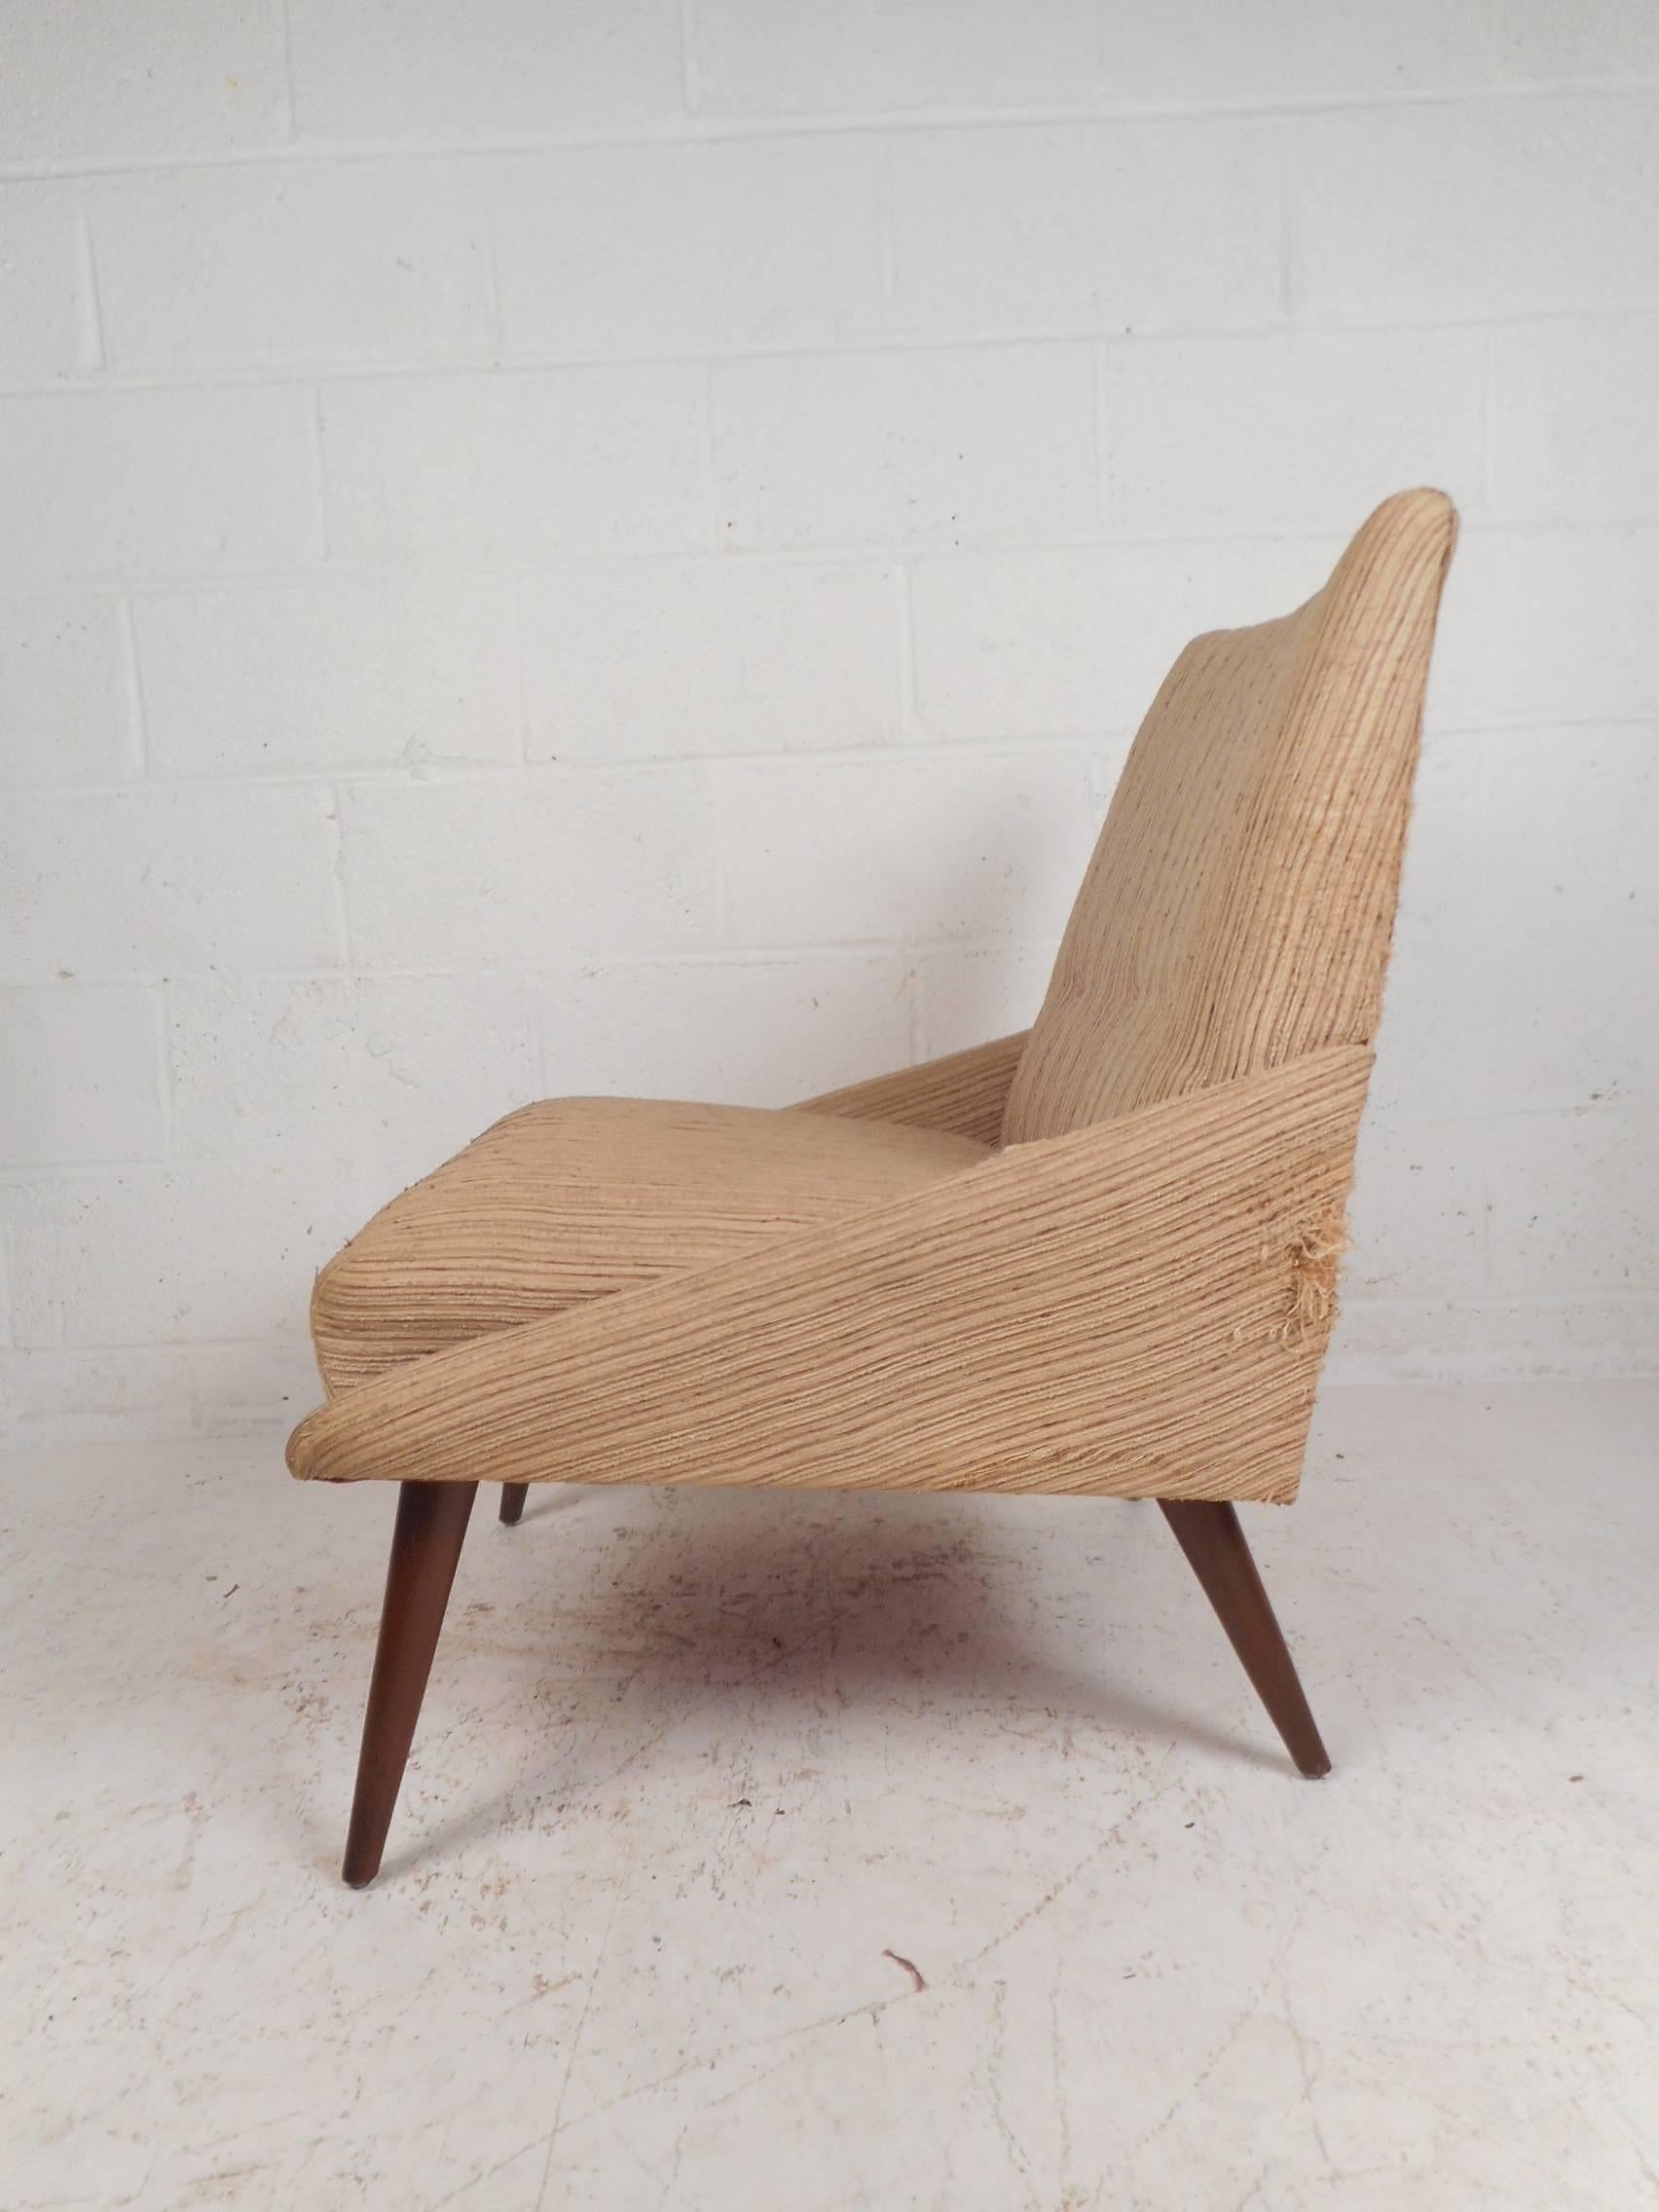 This unique vintage modern lounge chair features angled sides and splayed lets. Sleek design with a thick padded seat upholstered in plush beige fabric. This stylish and comfortable lounge chair makes the perfect addition to any seating arrangement.